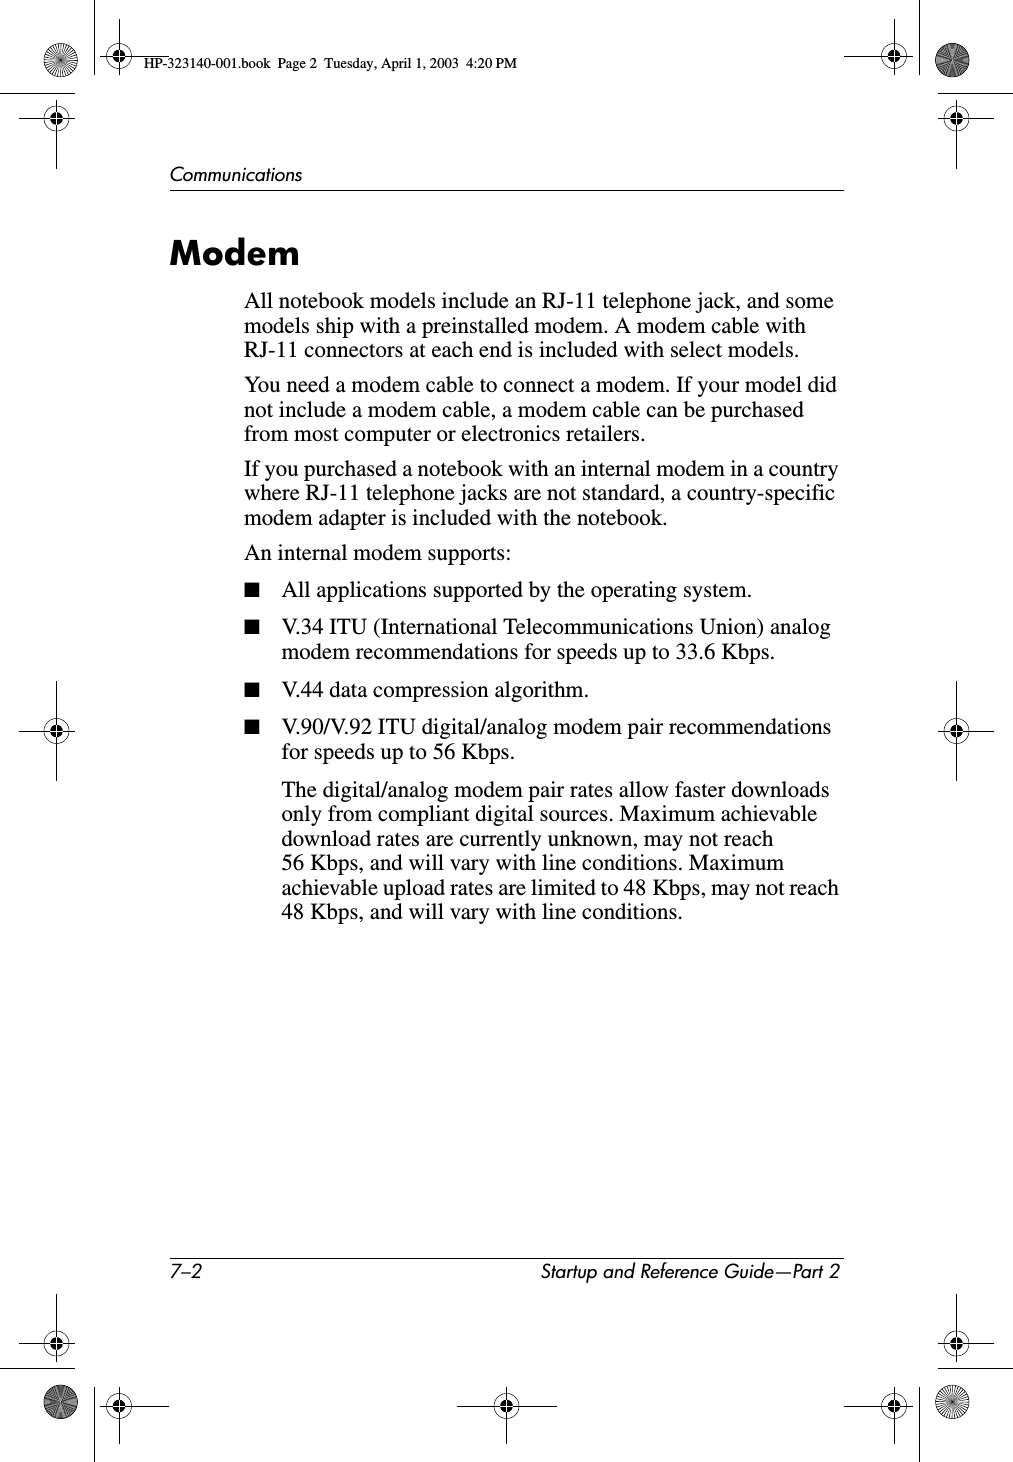 7–2 Startup and Reference Guide—Part 2CommunicationsModemAll notebook models include an RJ-11 telephone jack, and some models ship with a preinstalled modem. A modem cable with RJ-11 connectors at each end is included with select models. You need a modem cable to connect a modem. If your model did not include a modem cable, a modem cable can be purchased from most computer or electronics retailers. If you purchased a notebook with an internal modem in a country where RJ-11 telephone jacks are not standard, a country-specific modem adapter is included with the notebook.An internal modem supports:■All applications supported by the operating system.■V.34 ITU (International Telecommunications Union) analog modem recommendations for speeds up to 33.6 Kbps.■V.44 data compression algorithm.■V.90/V.92 ITU digital/analog modem pair recommendations for speeds up to 56 Kbps.The digital/analog modem pair rates allow faster downloads only from compliant digital sources. Maximum achievable download rates are currently unknown, may not reach 56 Kbps, and will vary with line conditions. Maximum achievable upload rates are limited to 48 Kbps, may not reach 48 Kbps, and will vary with line conditions.HP-323140-001.book  Page 2  Tuesday, April 1, 2003  4:20 PM